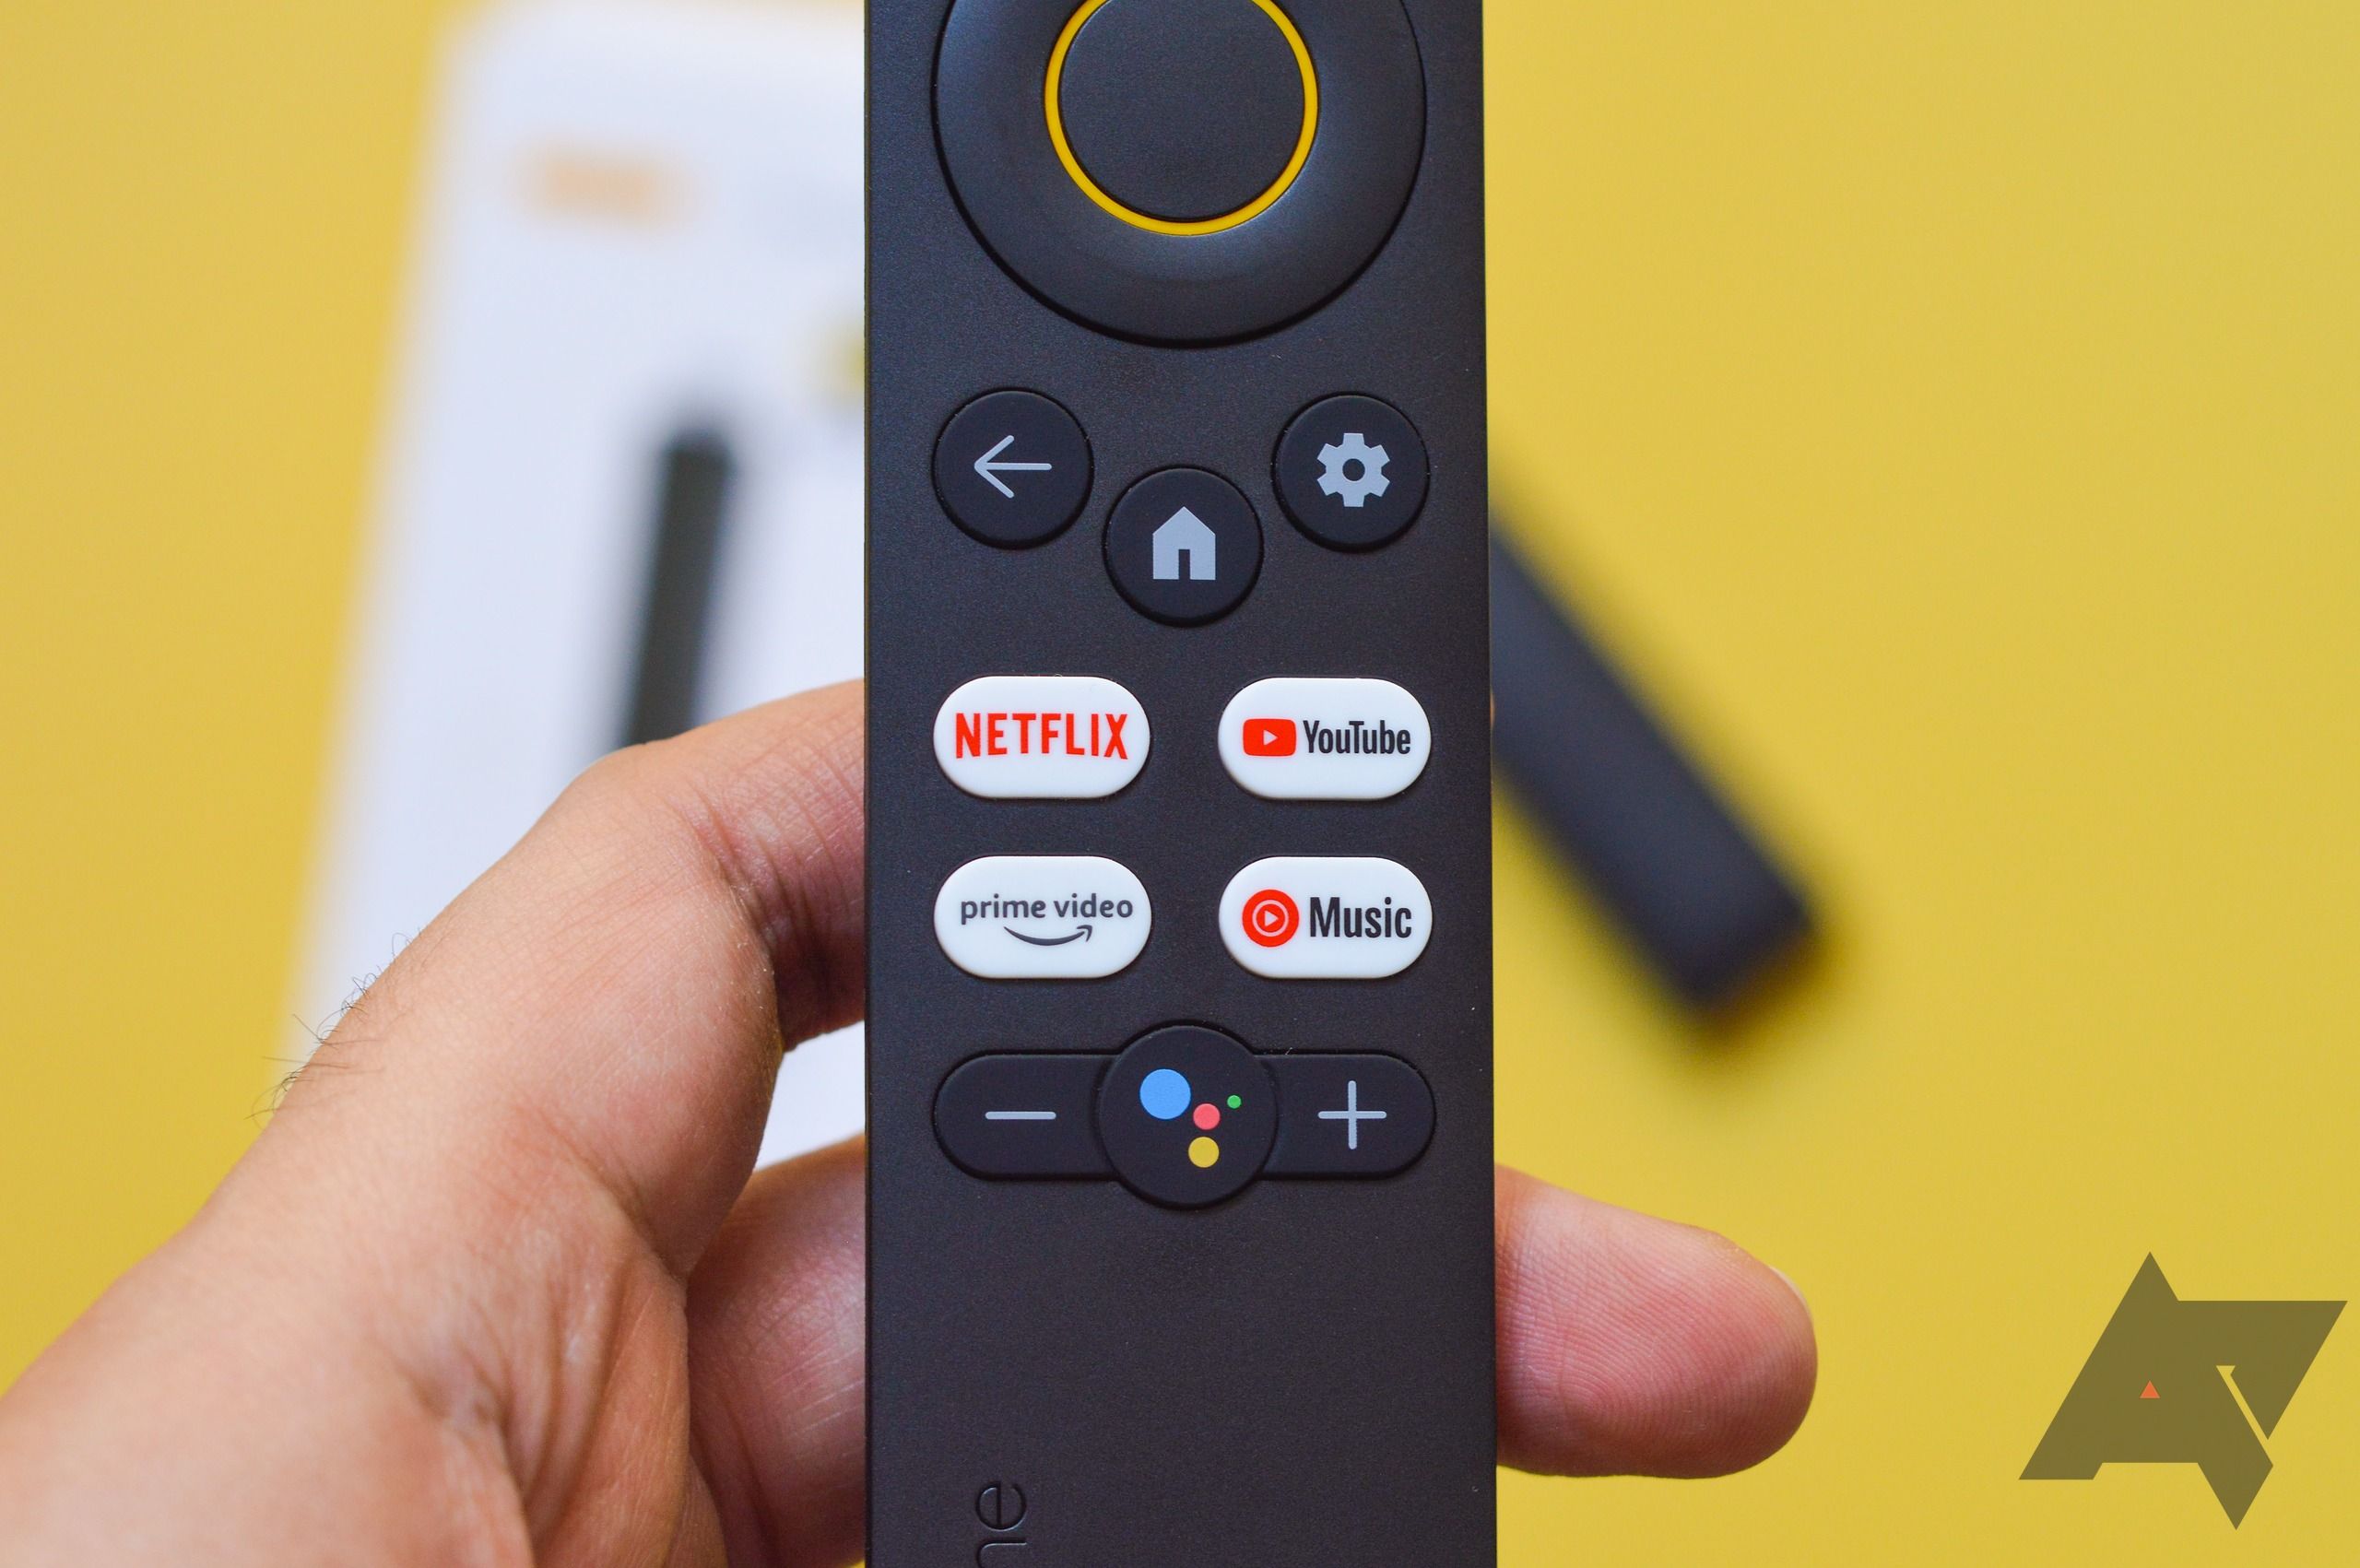 Xiaomi TV Stick 4K launched: How it compares to Realme 4K Smart Google TV  Stick - Times of India